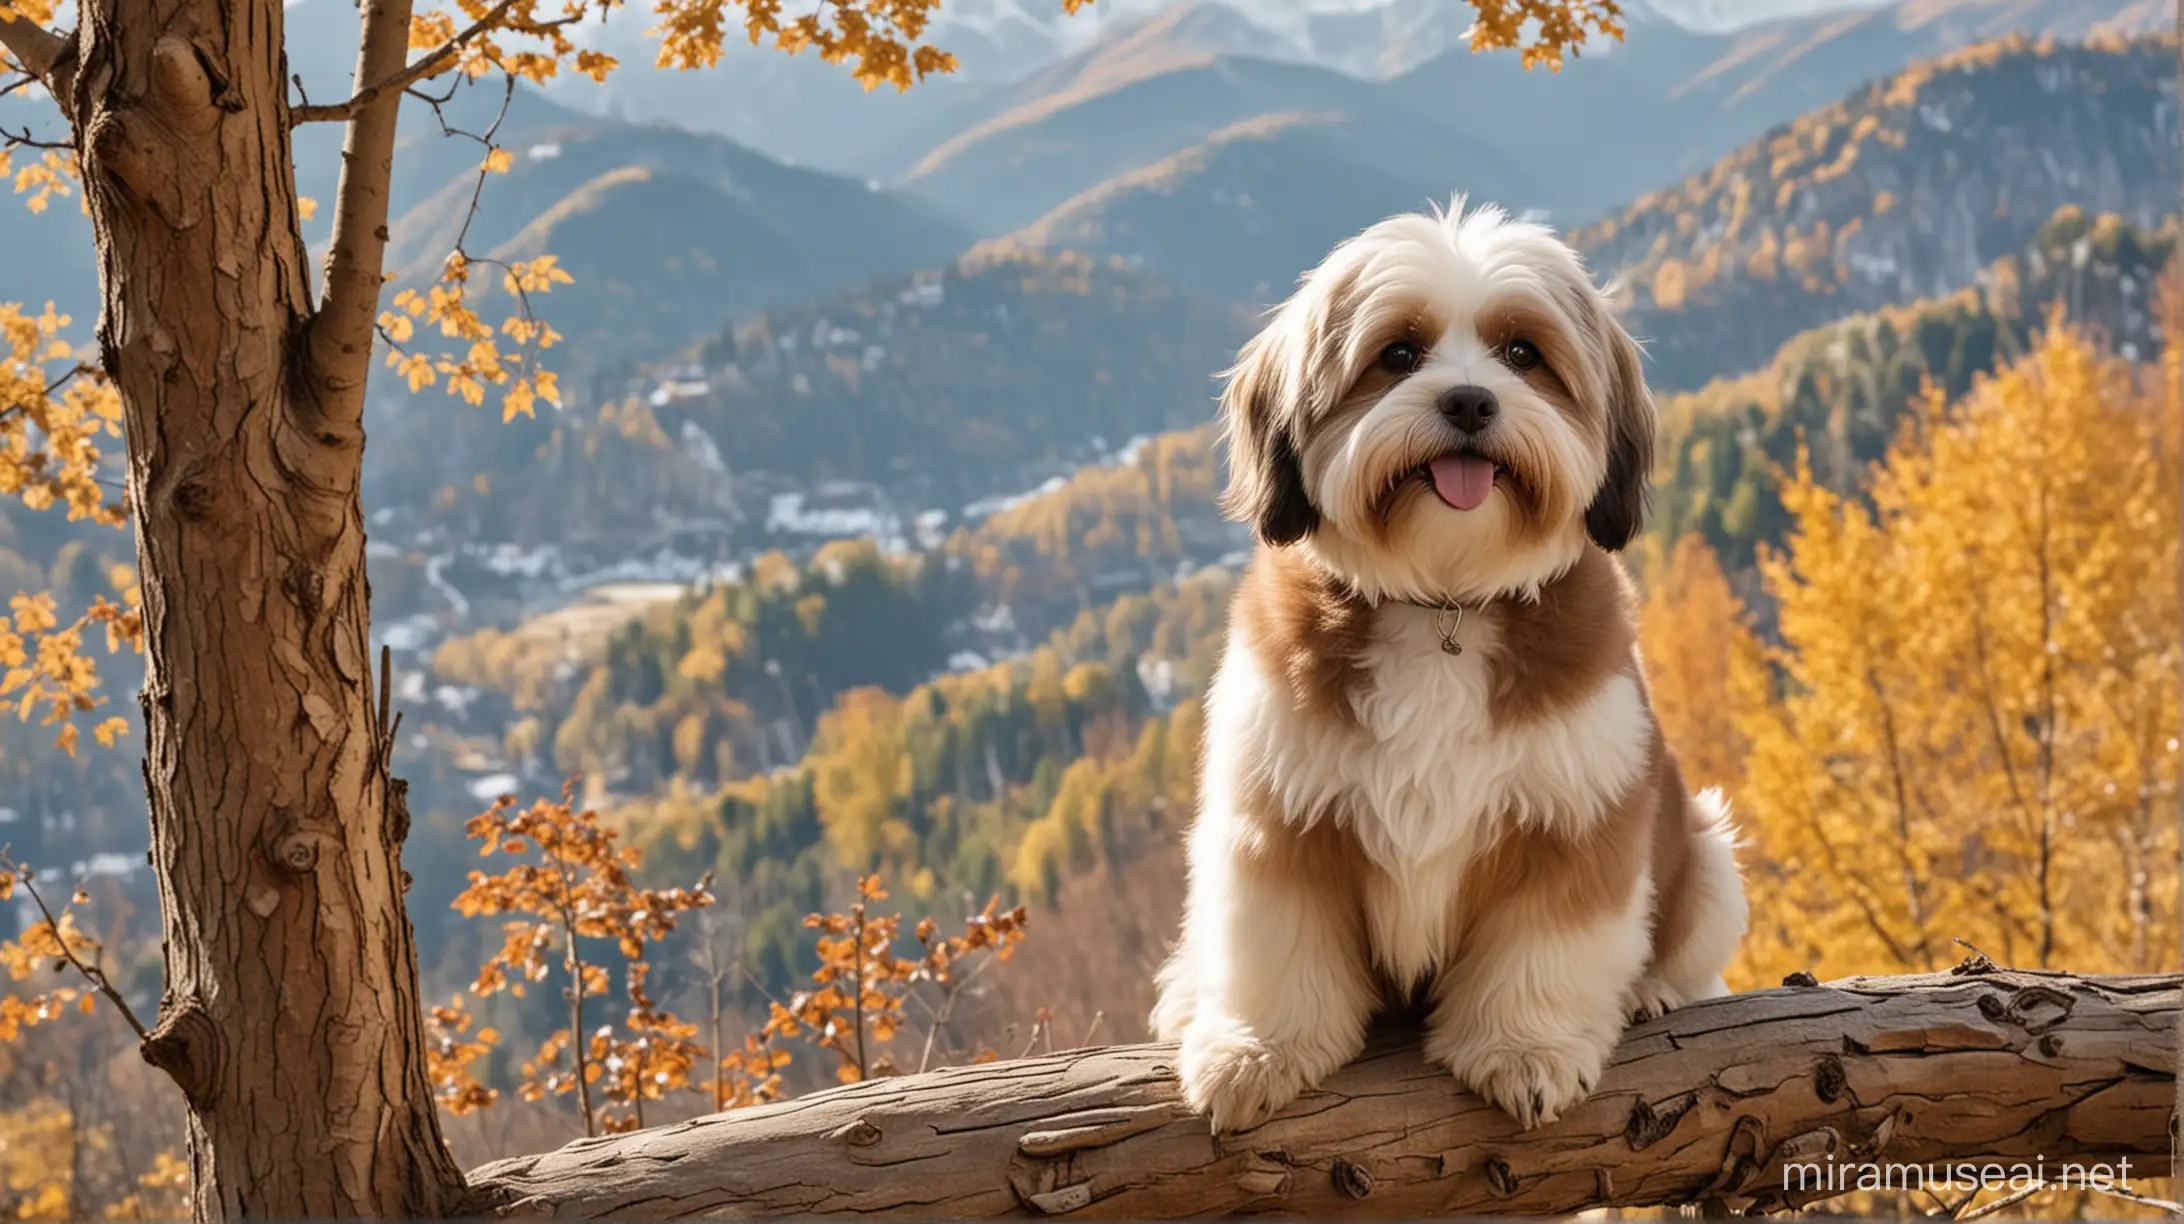 Alpine Landscape with Brown Havanese Dog and Majestic Eagle